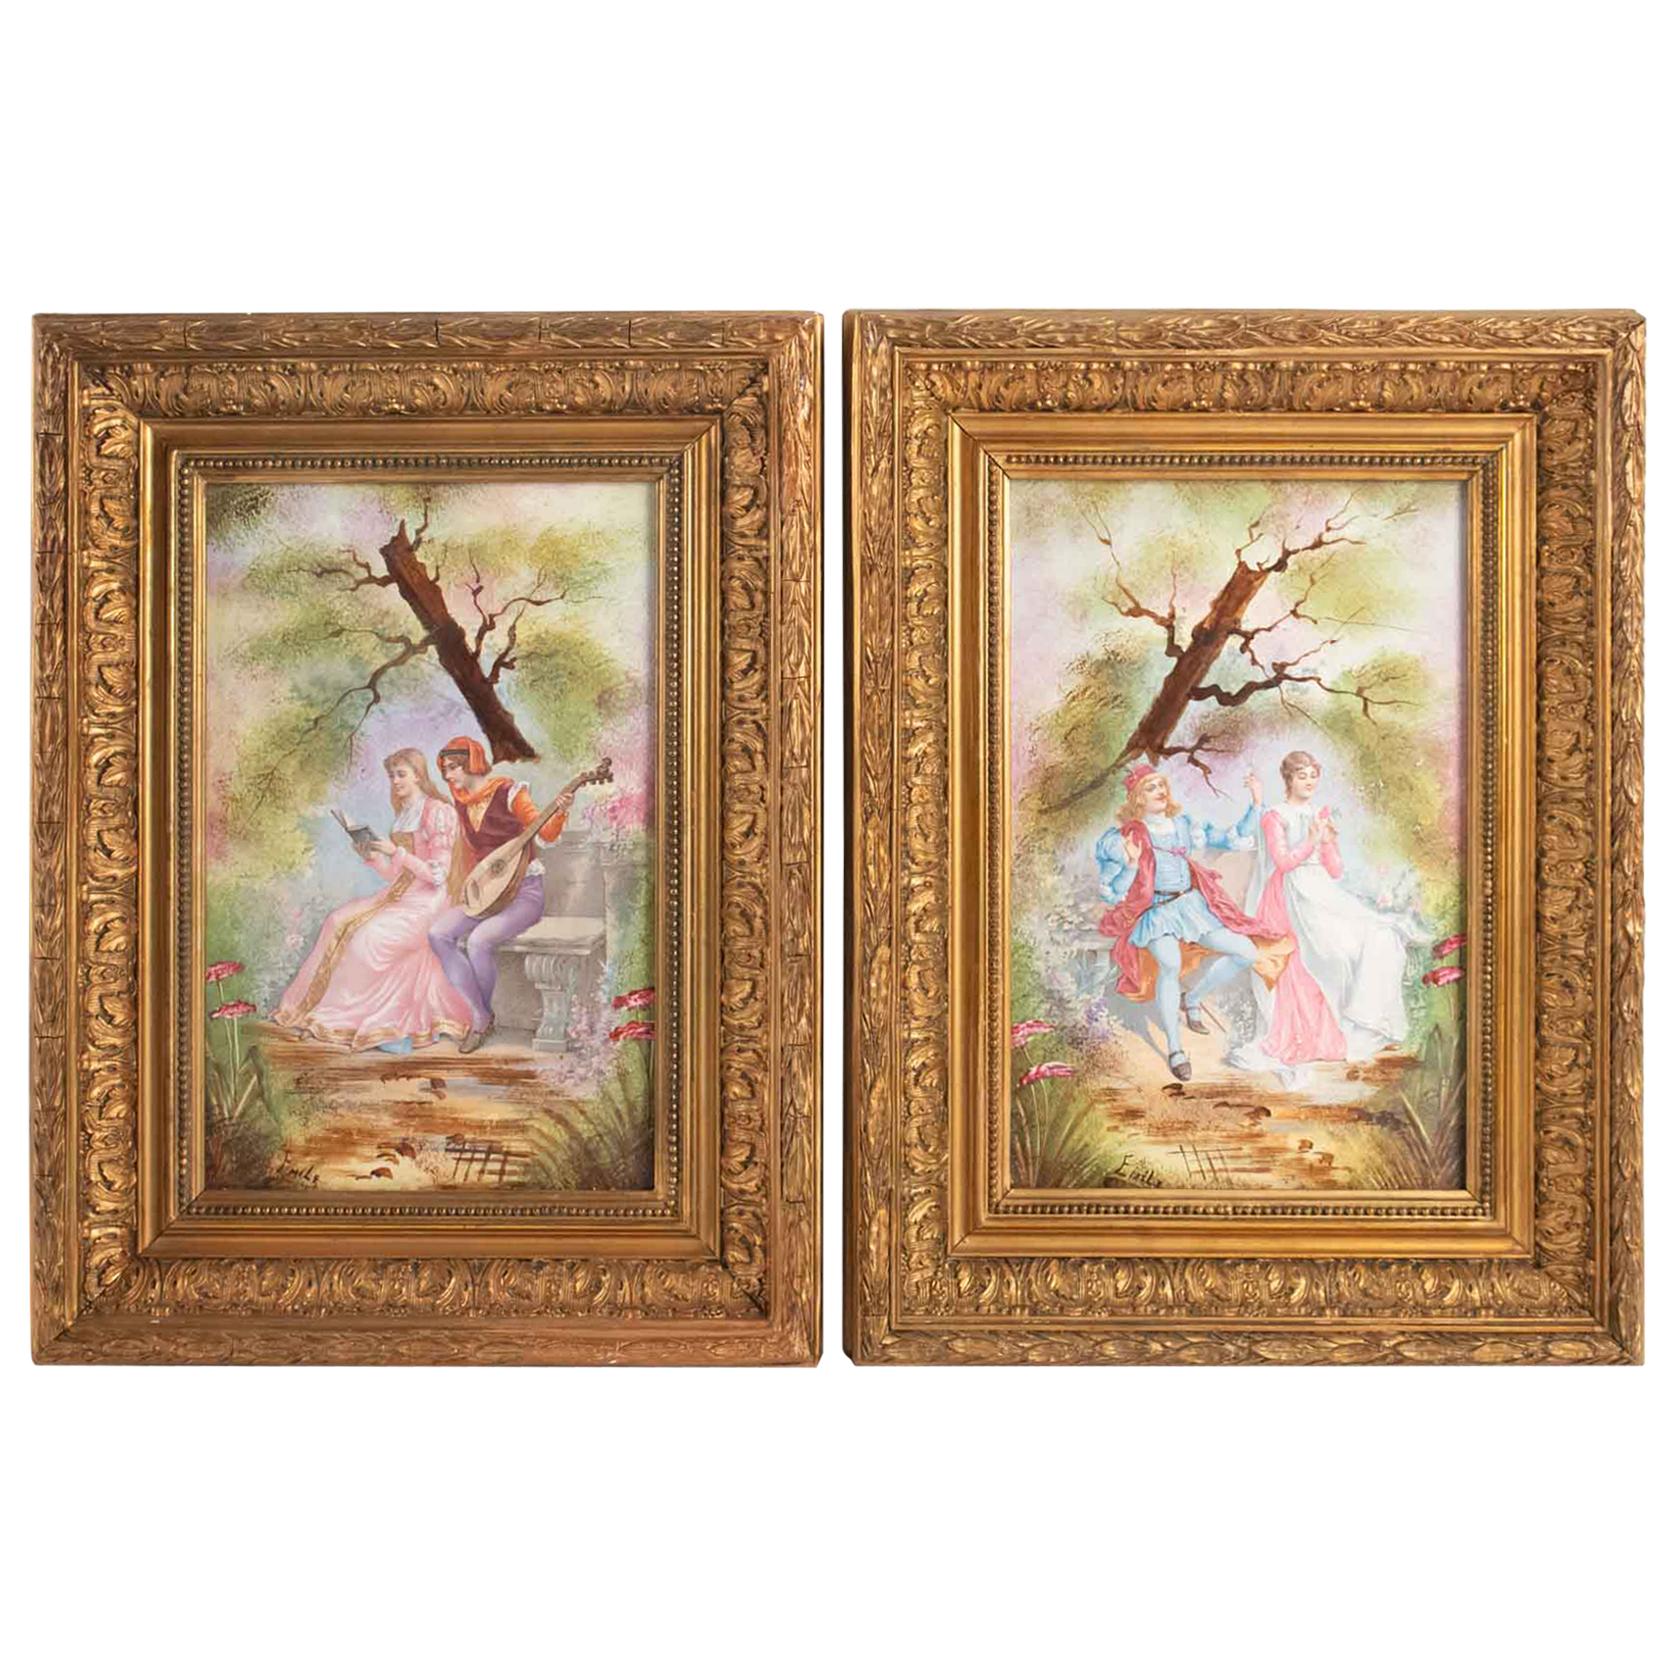 Pair of Paintings on Porcelain, Gallant Scene, 1900, Framed with Frames Napoleon